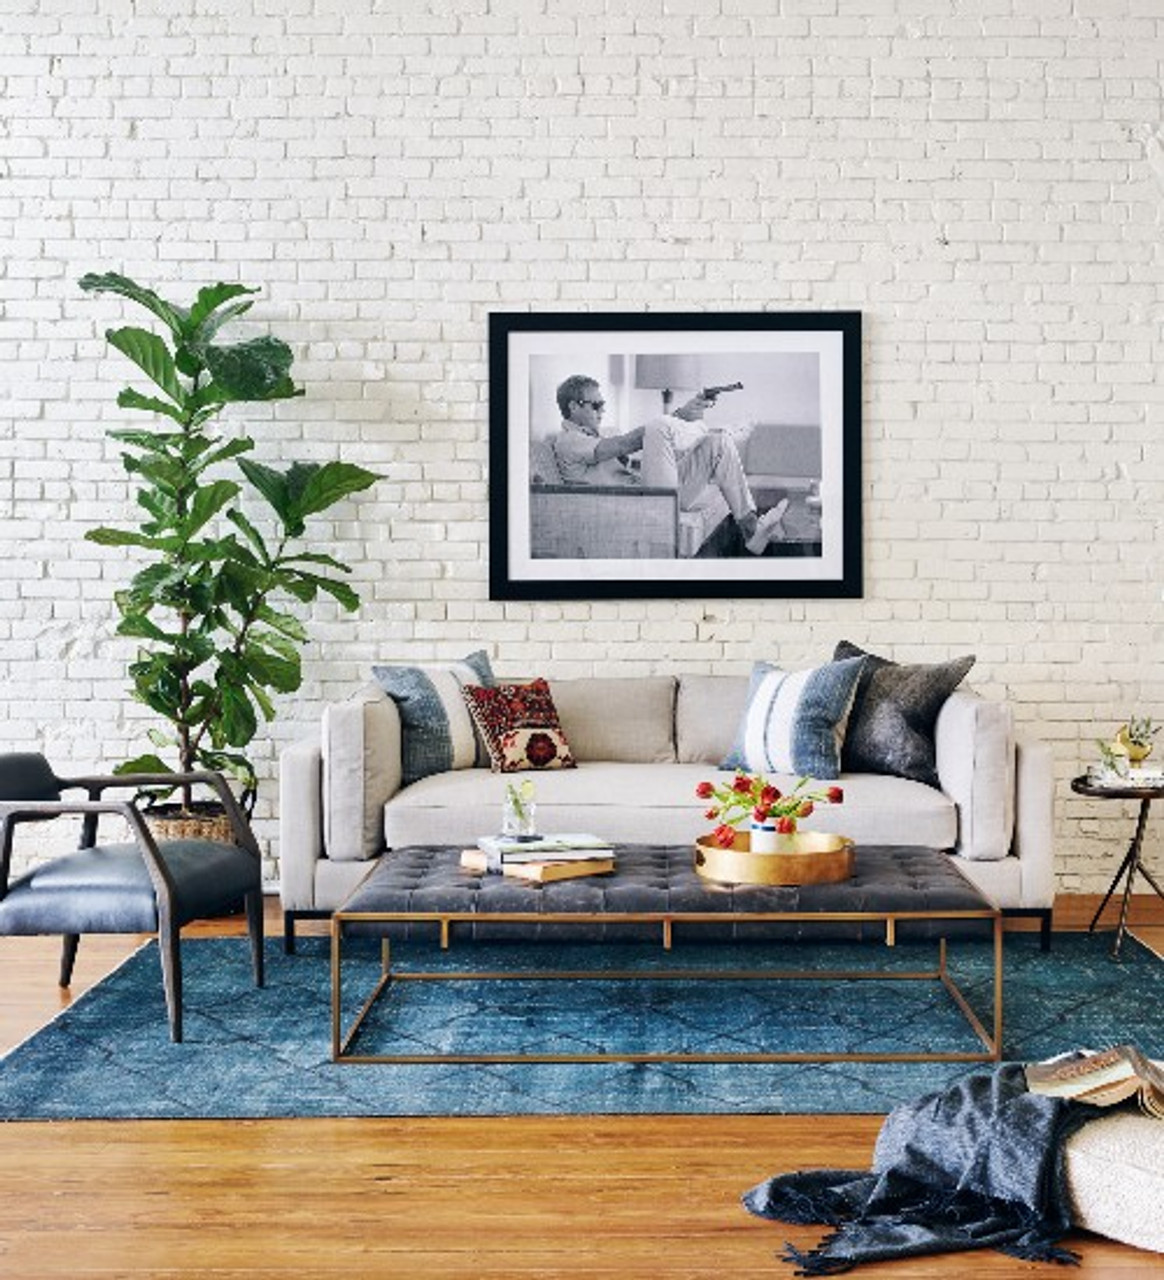 The Best Ways To Incorporate Feng Shui In Your Home